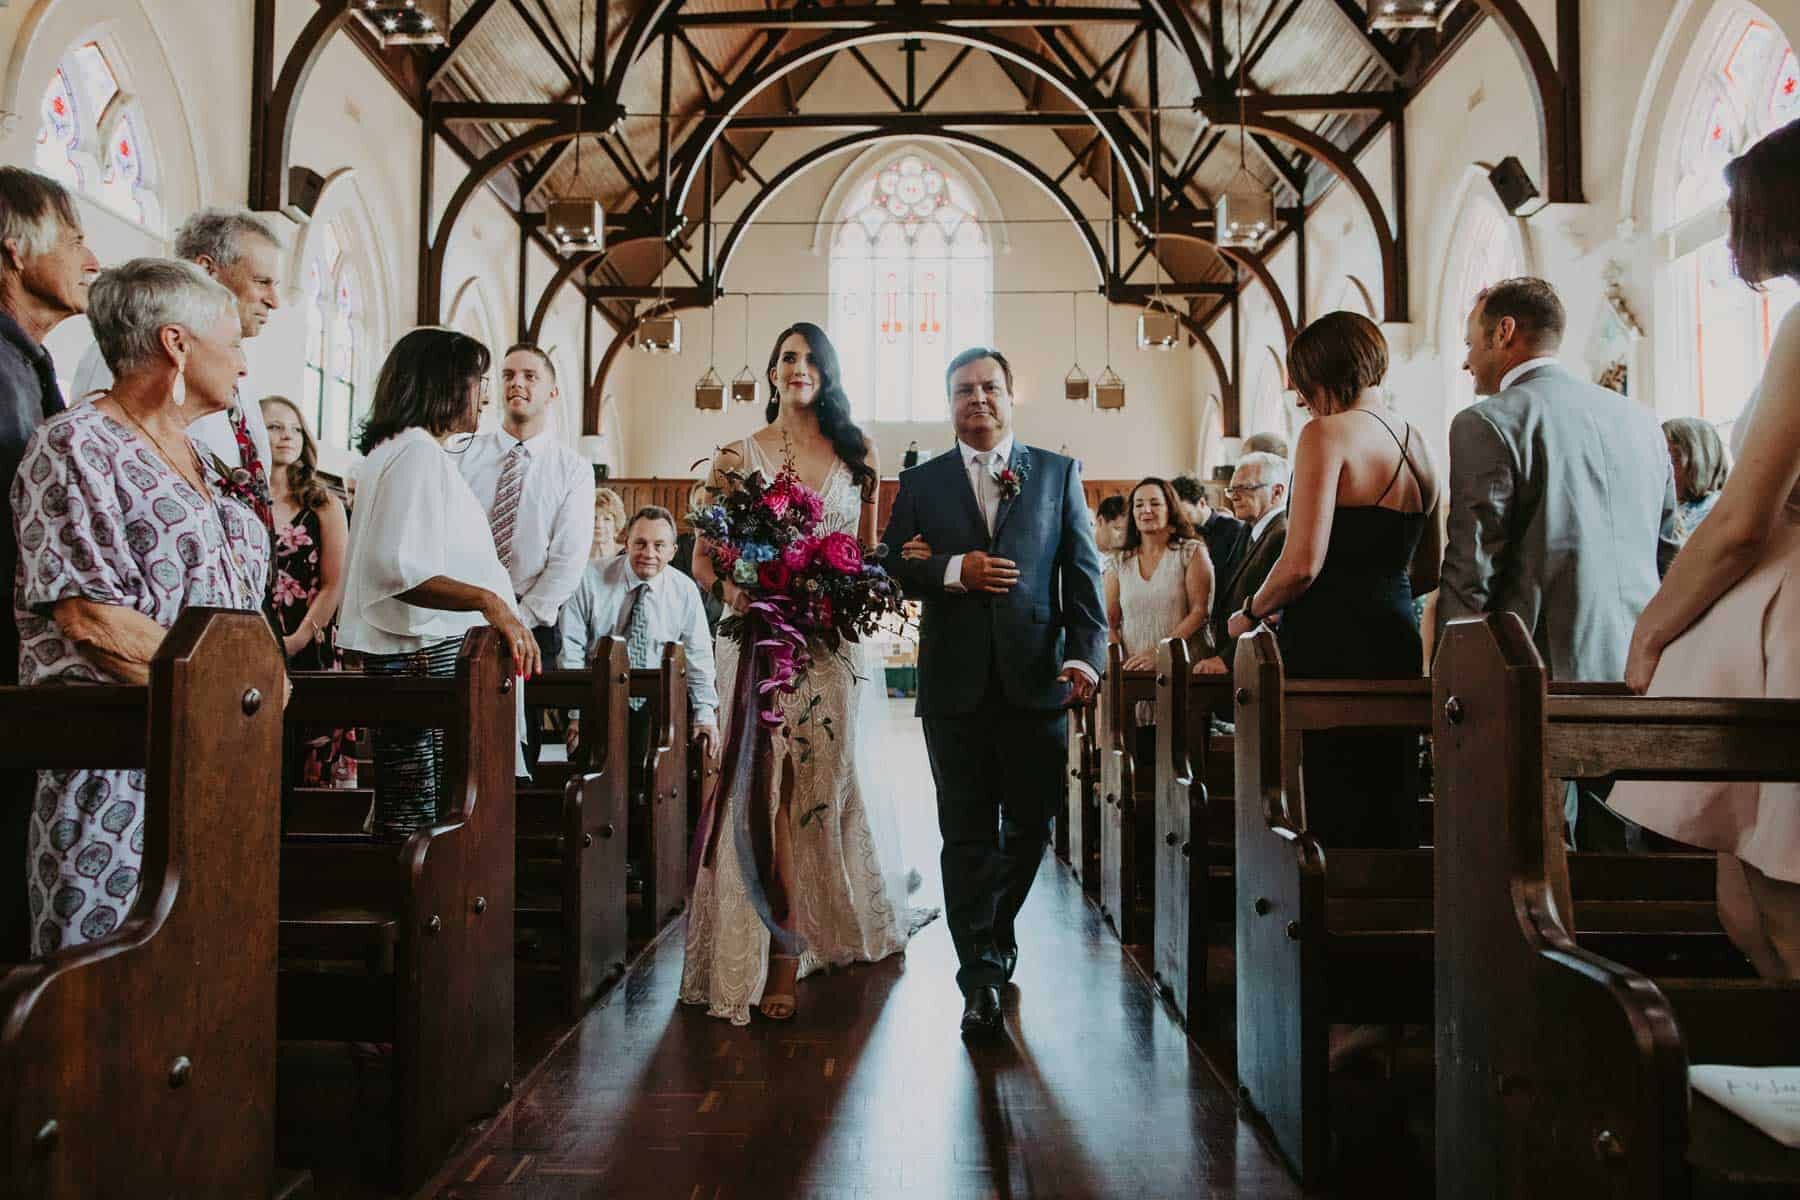 St Mary's wedding Leederville Perth